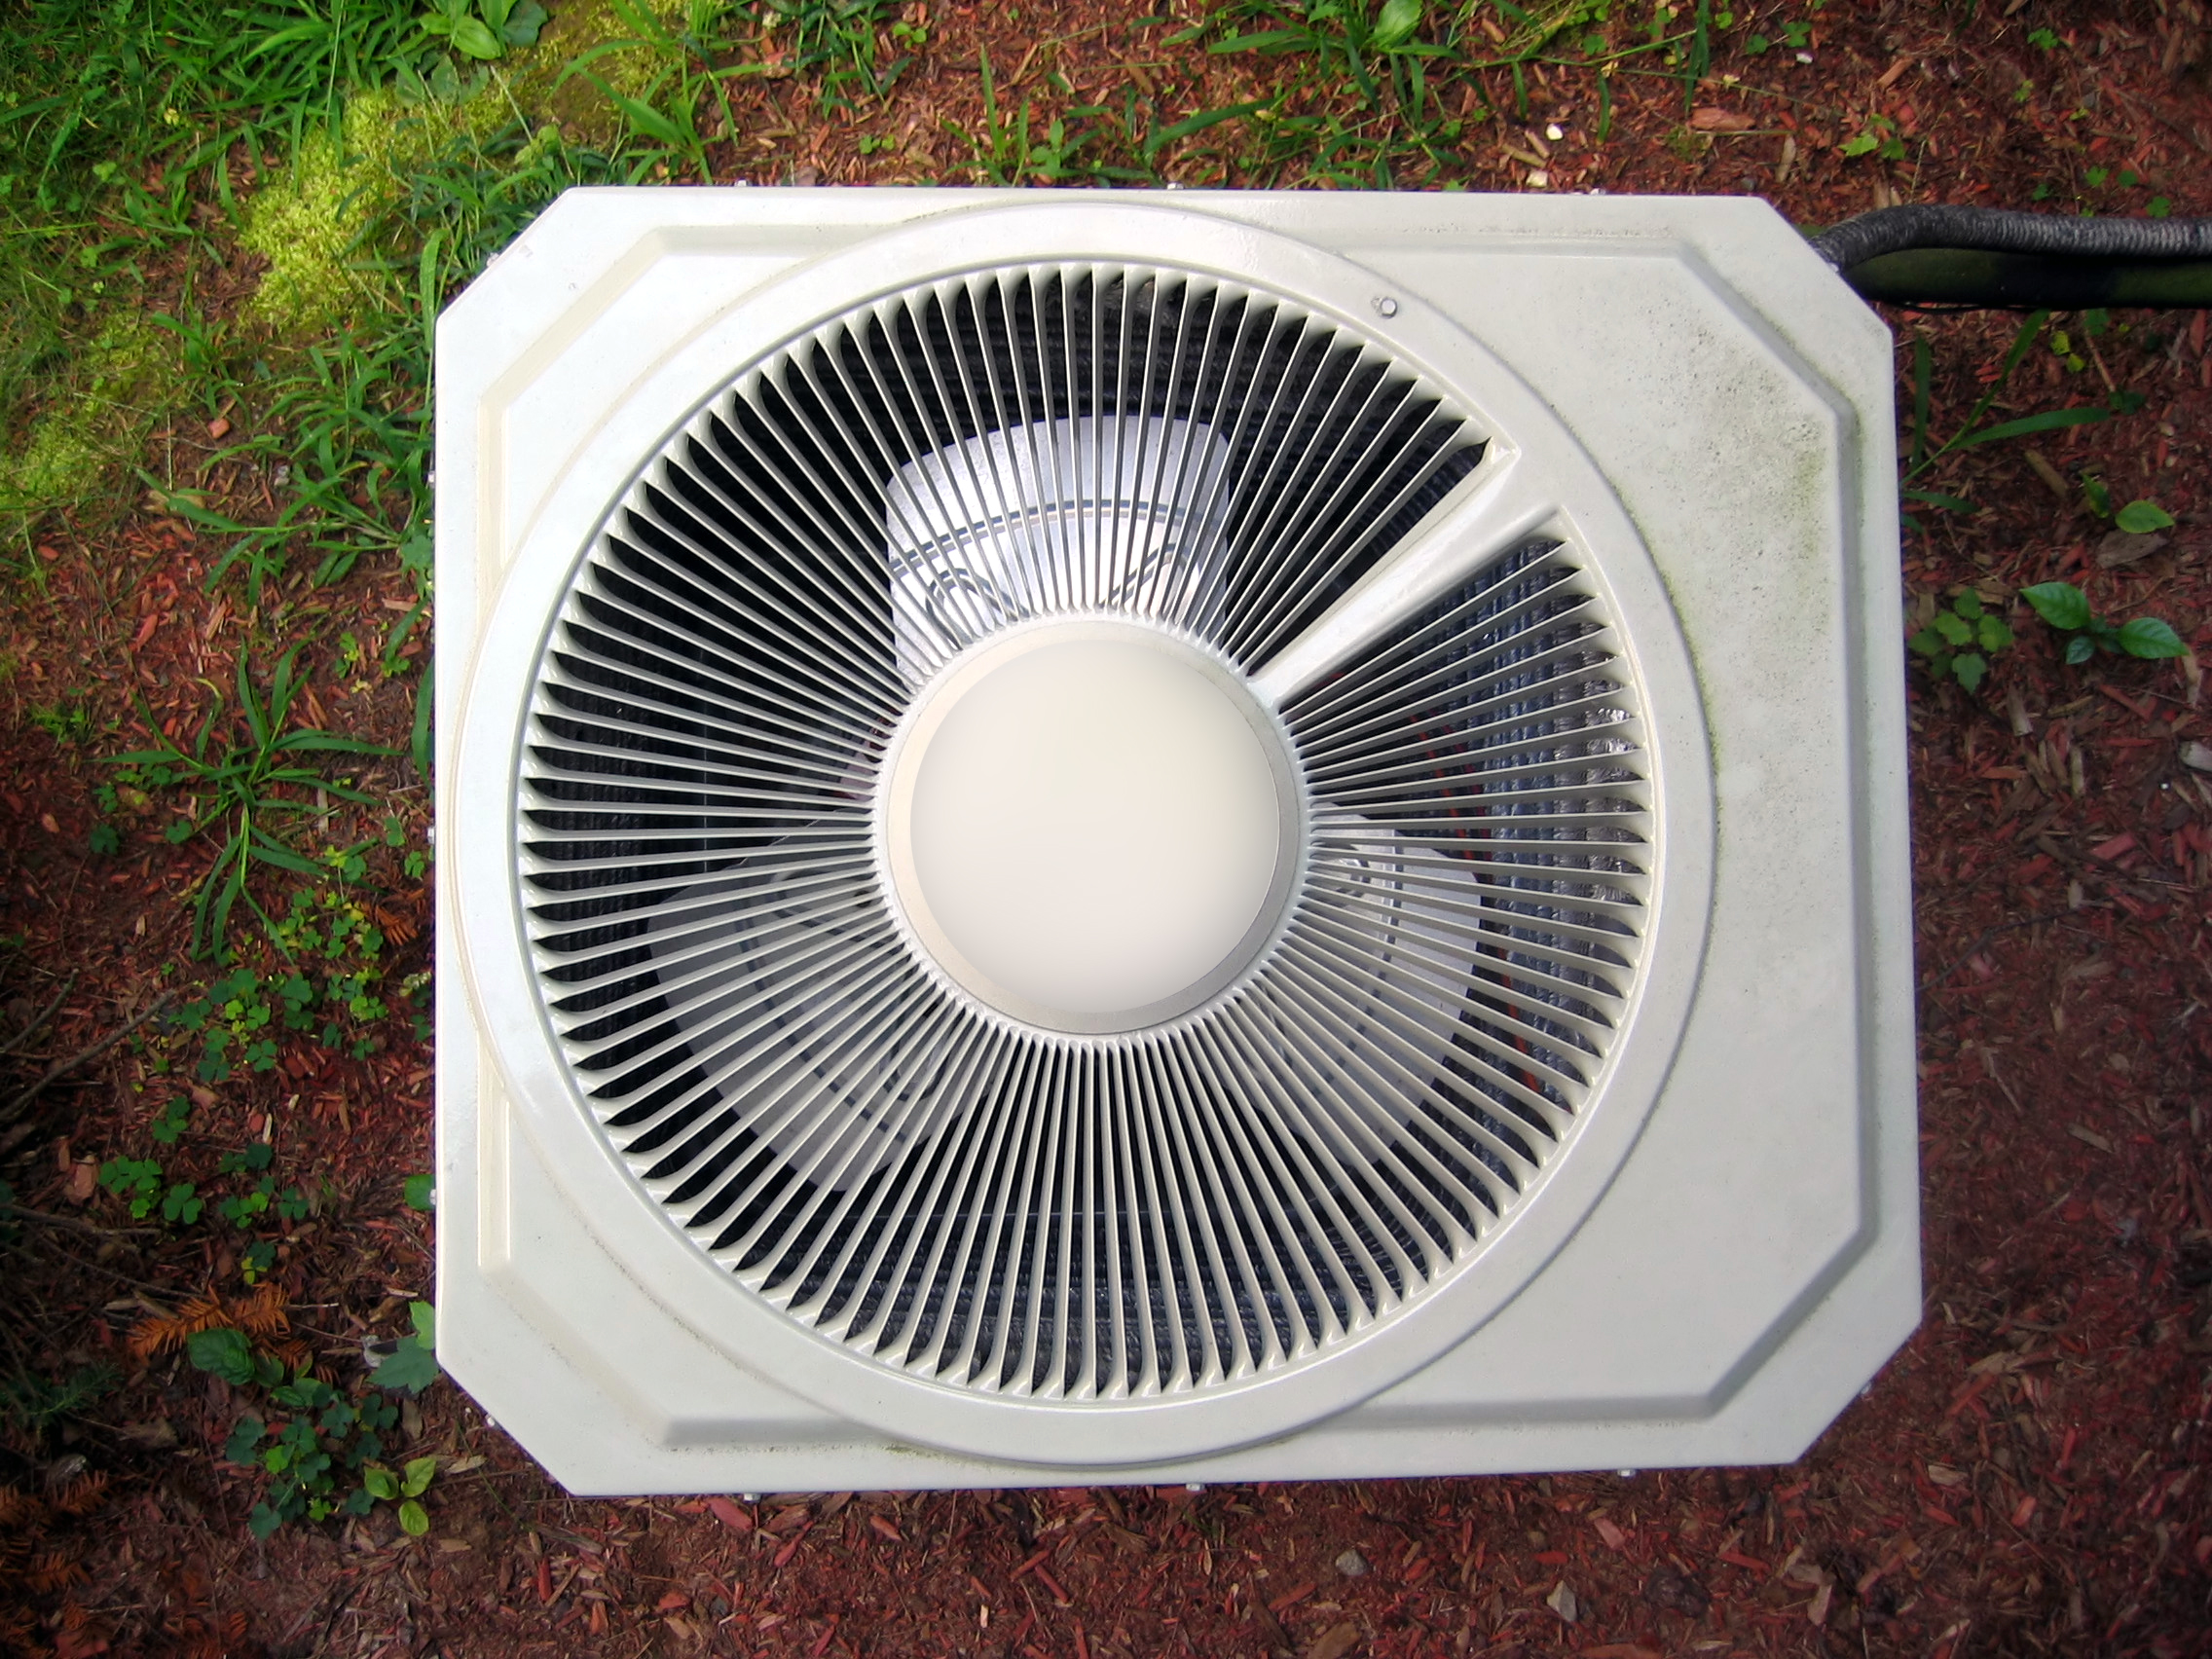 What Are the Best Ways to Attend to Your HVAC Unit Before Spring?